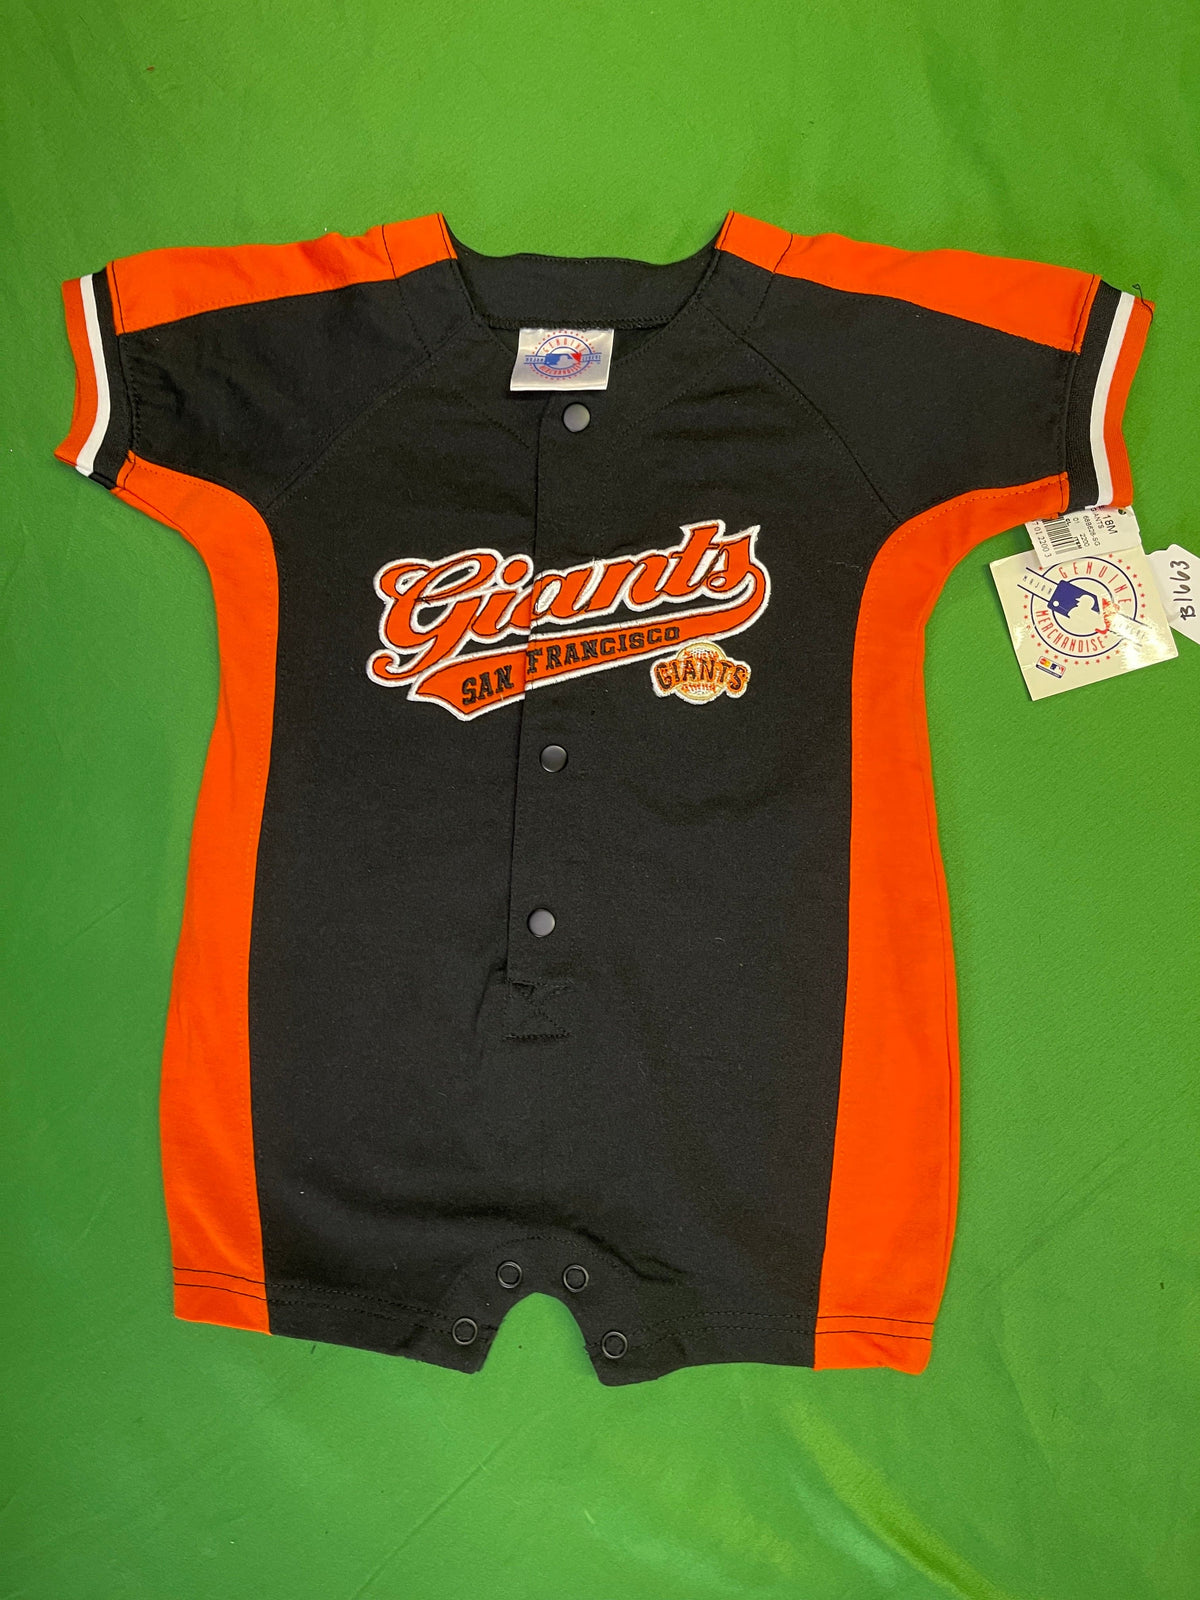 MLB San Francisco Giants Benitez Jersey-Style Play Outfit Toddler 18 Months NWT